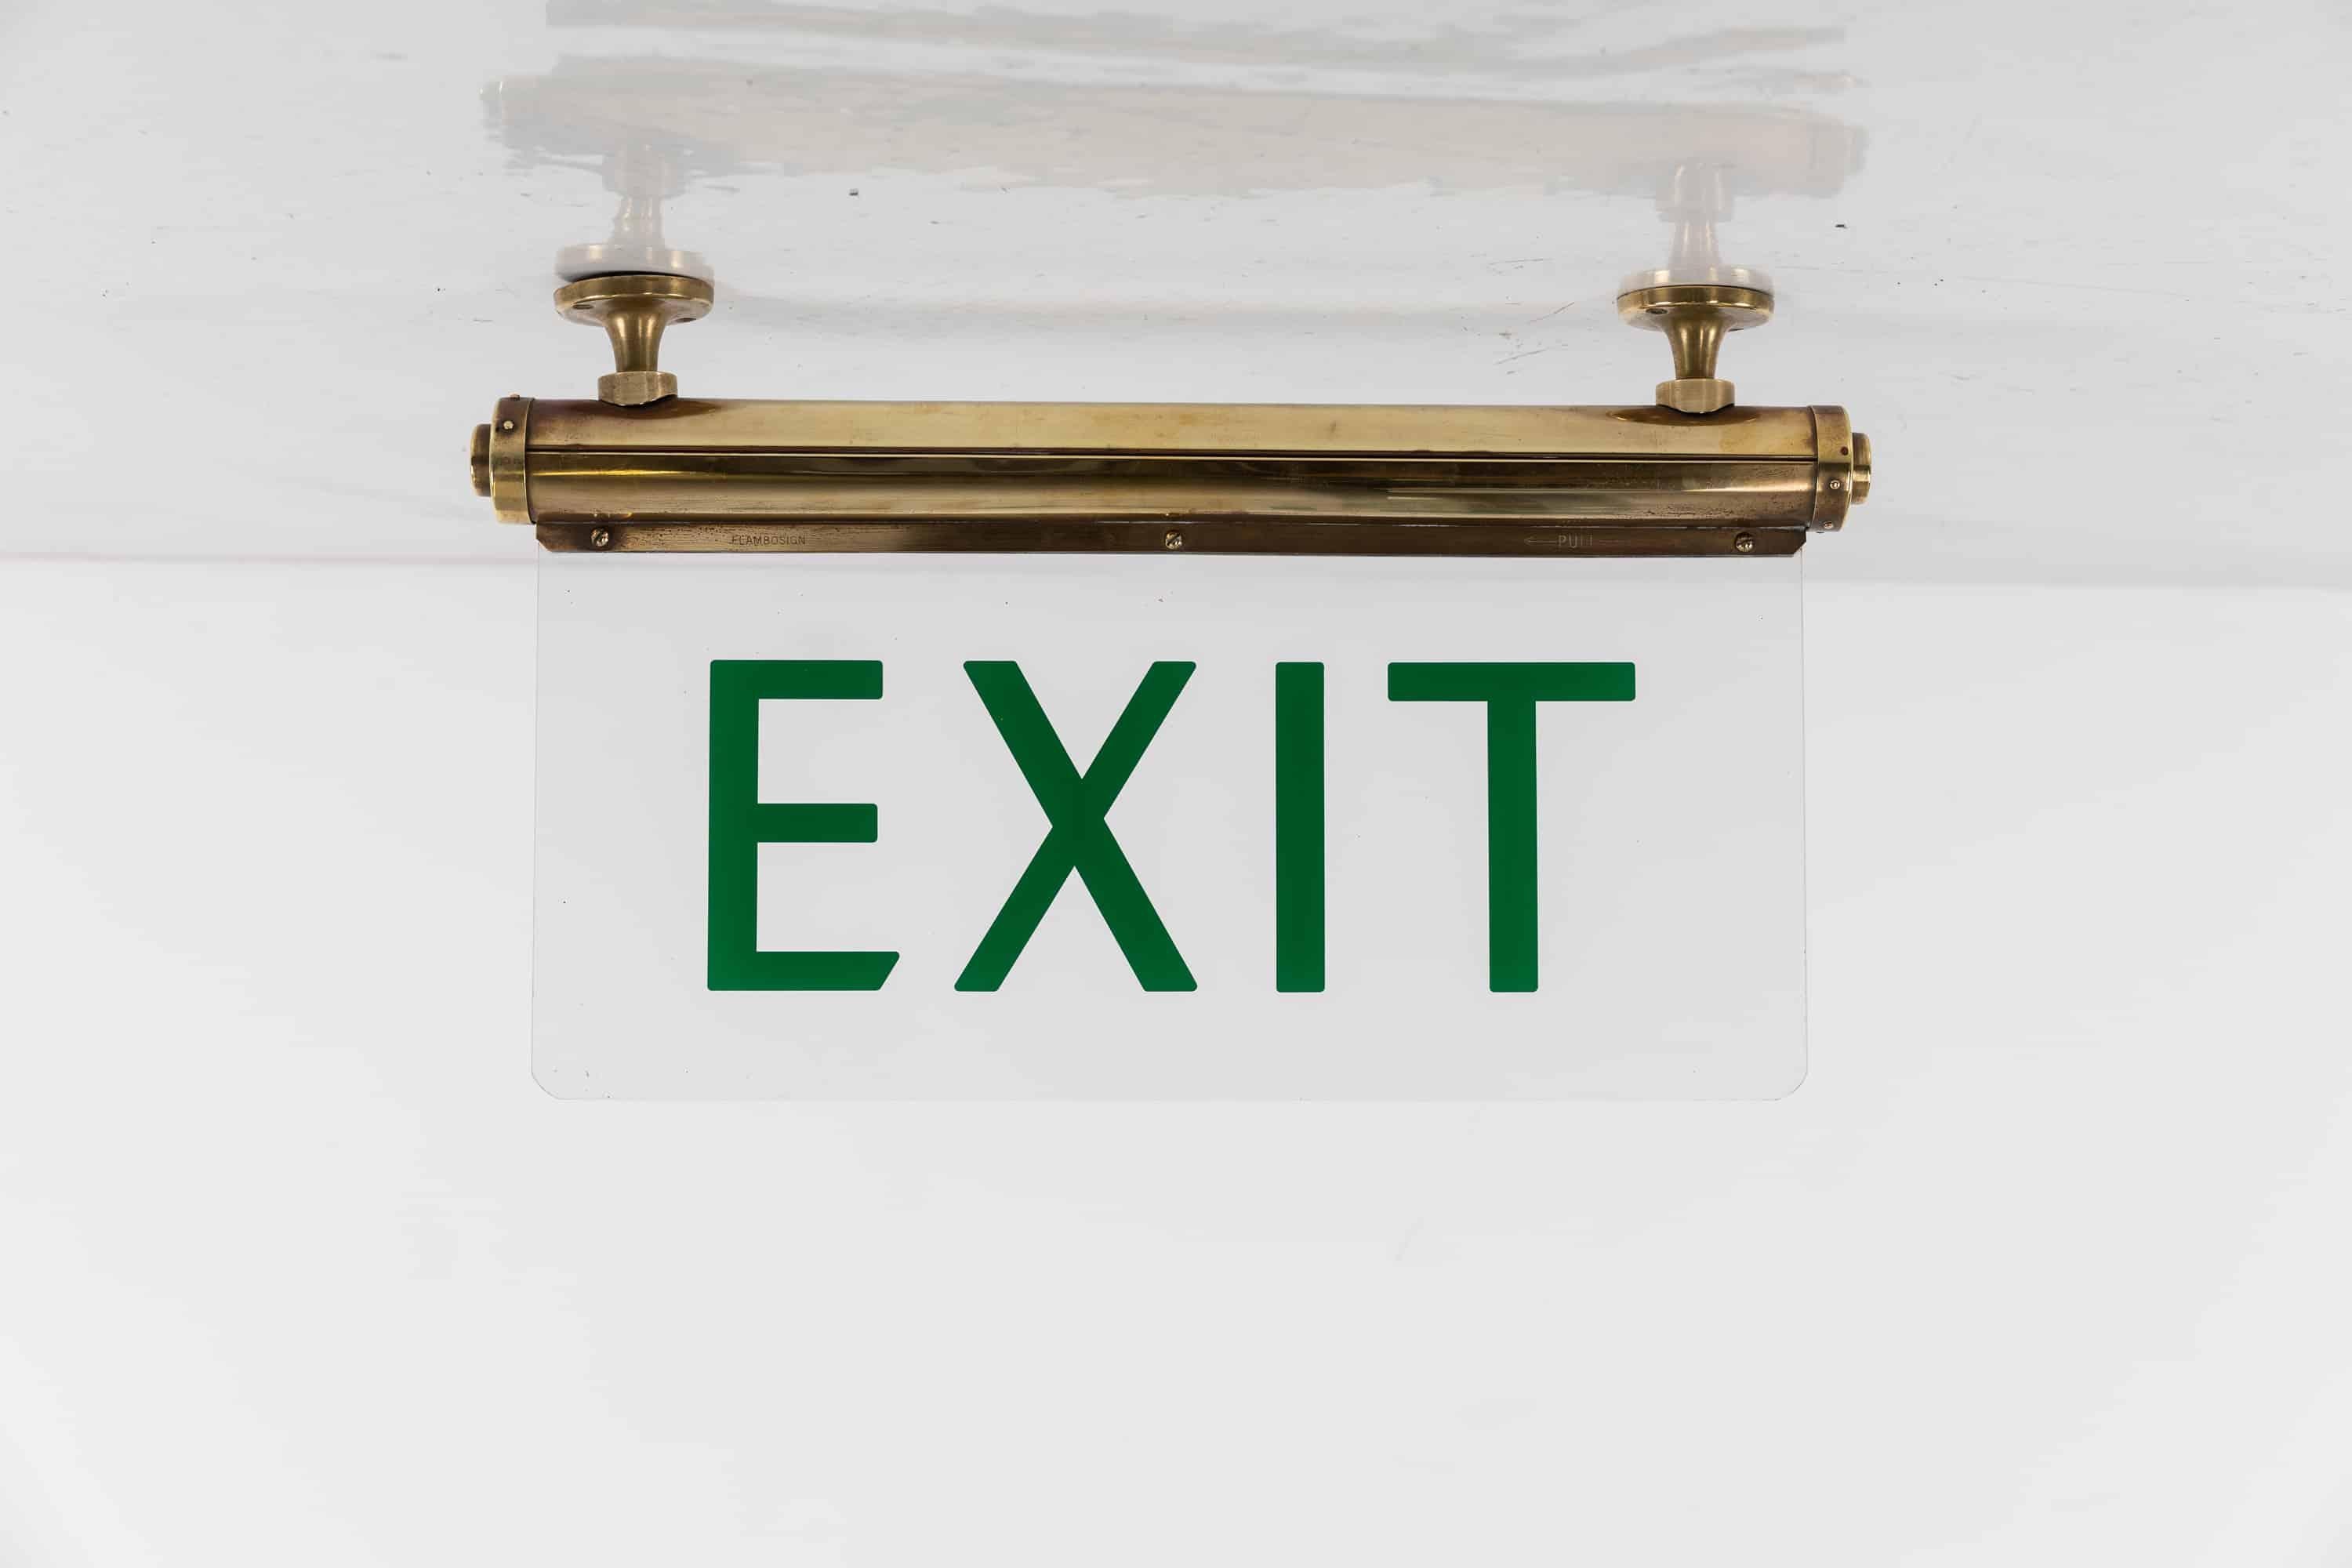 Antique Industrial Art Deco Brass Flambosign Illuminated Exit Sign, circa 1930 In Good Condition For Sale In London, GB